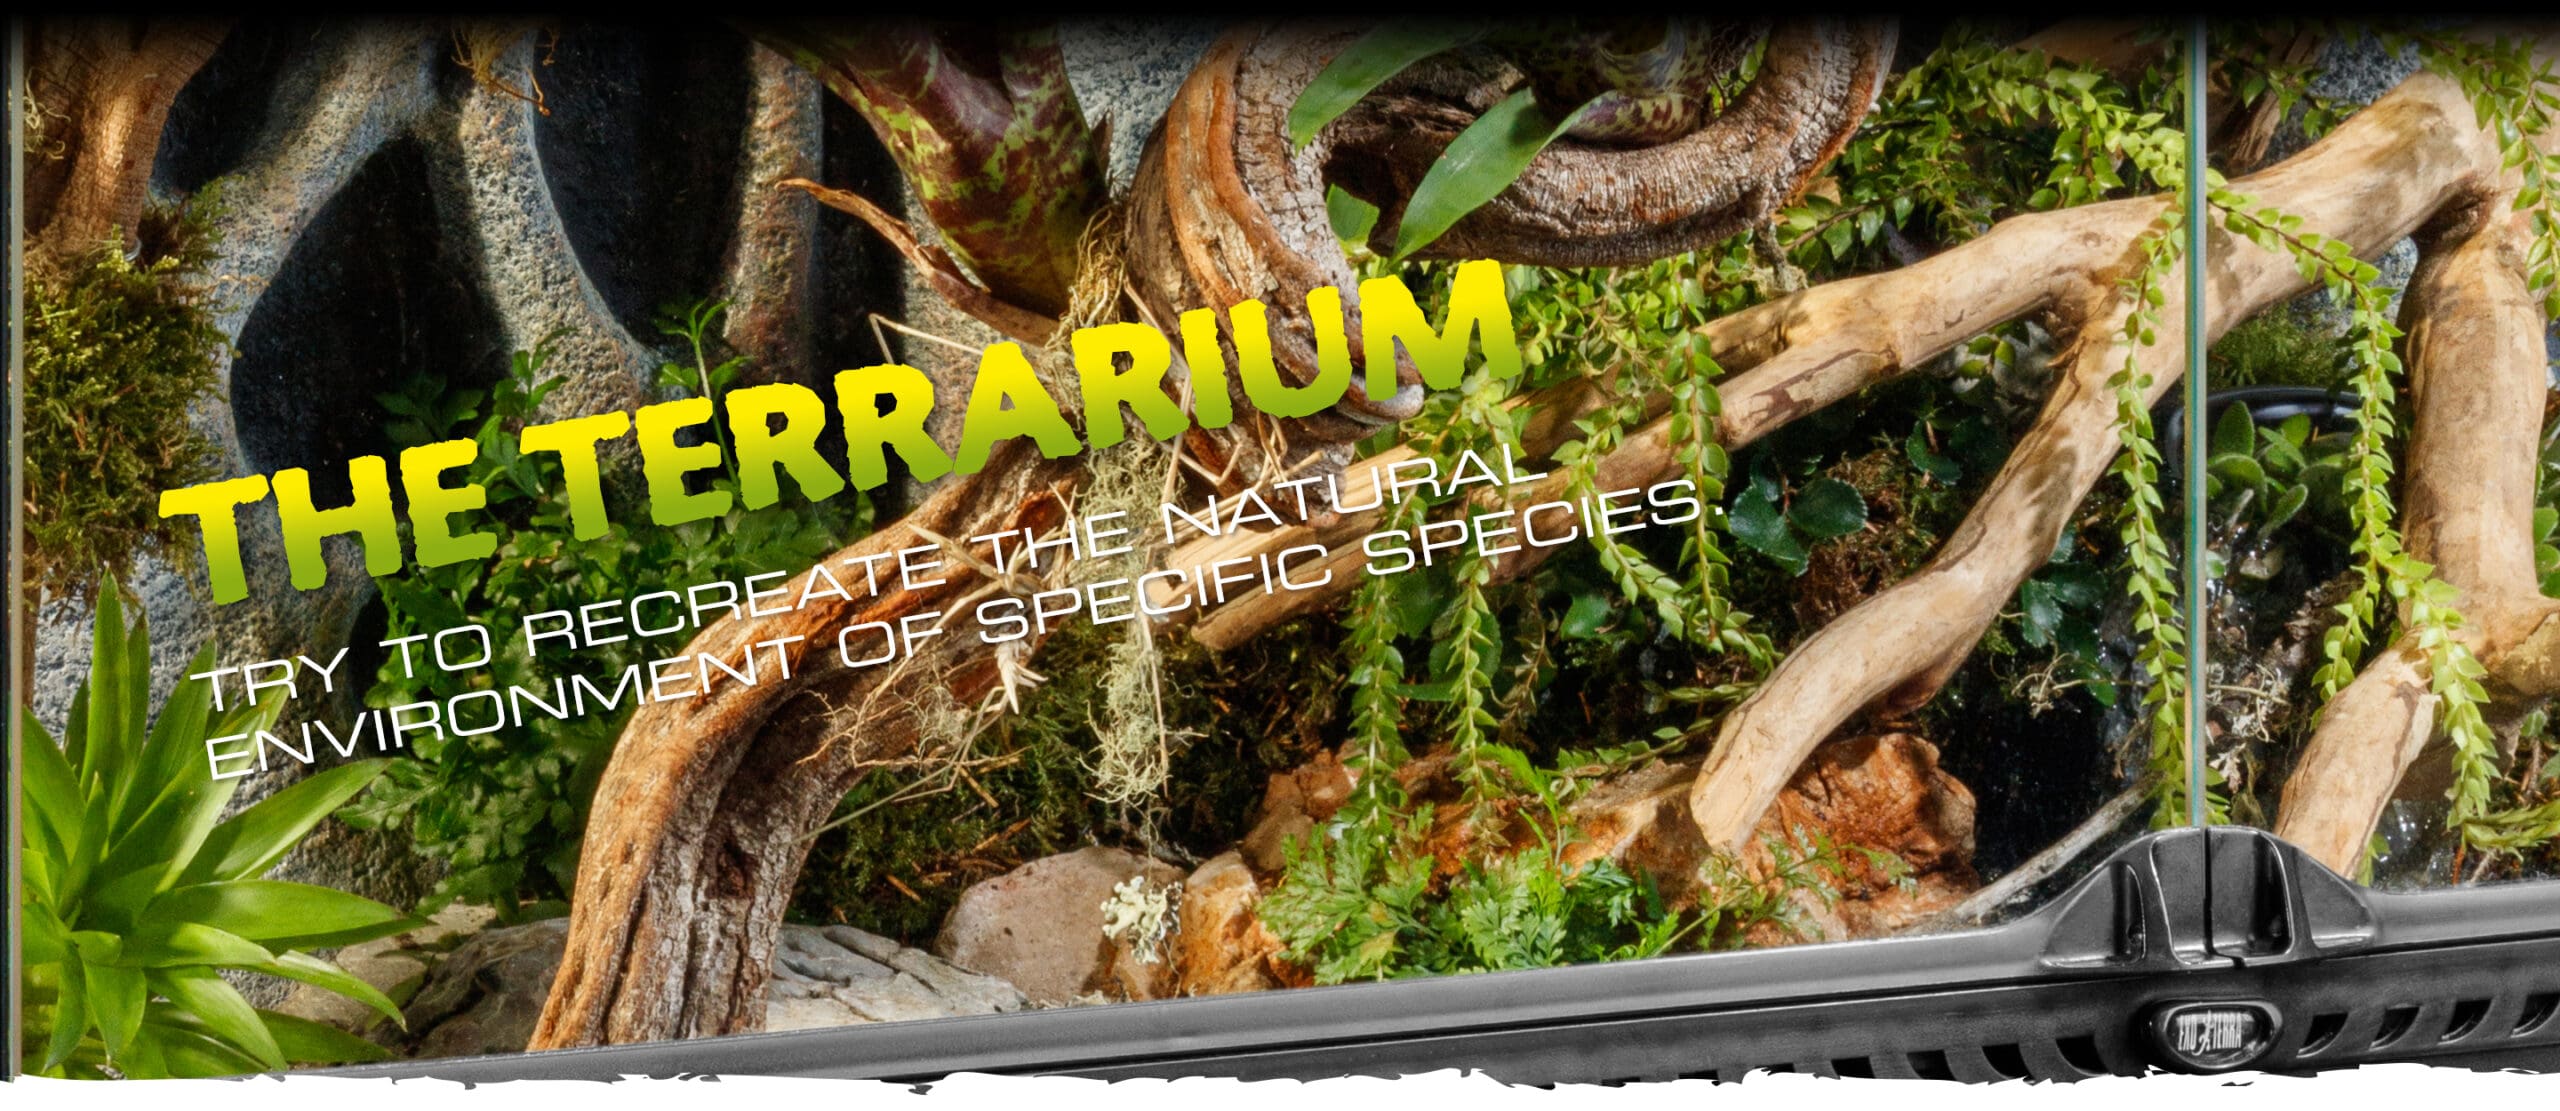 The terrarium is without doubt the most important aspect of successful reptile and amphibian keeping.